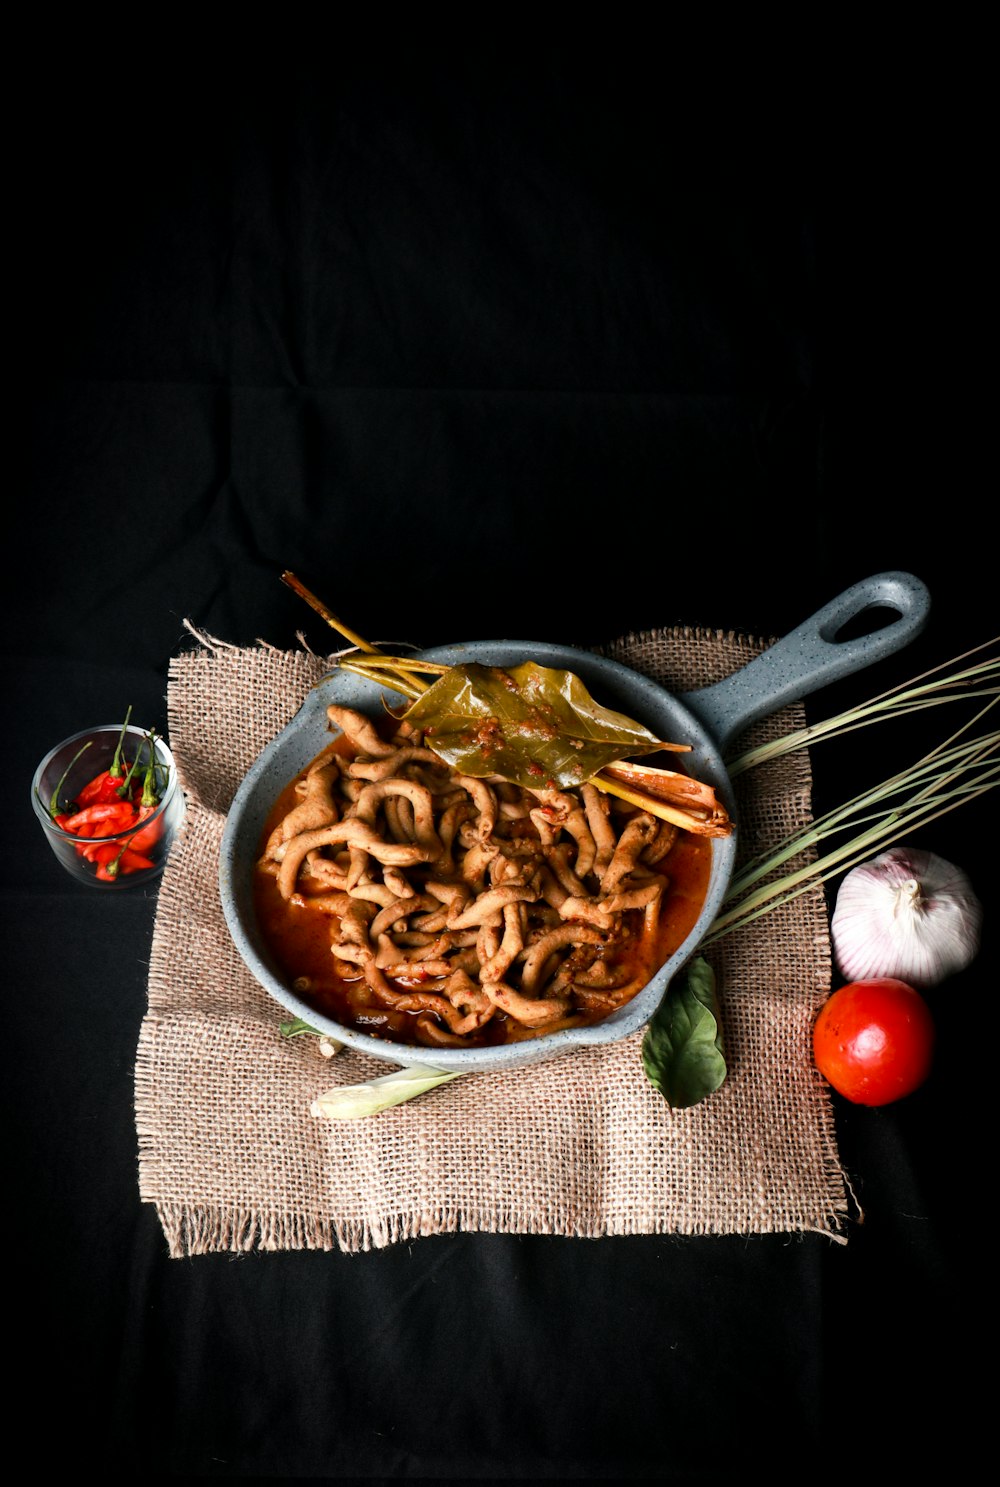 a bowl of noodles and vegetables on a cloth